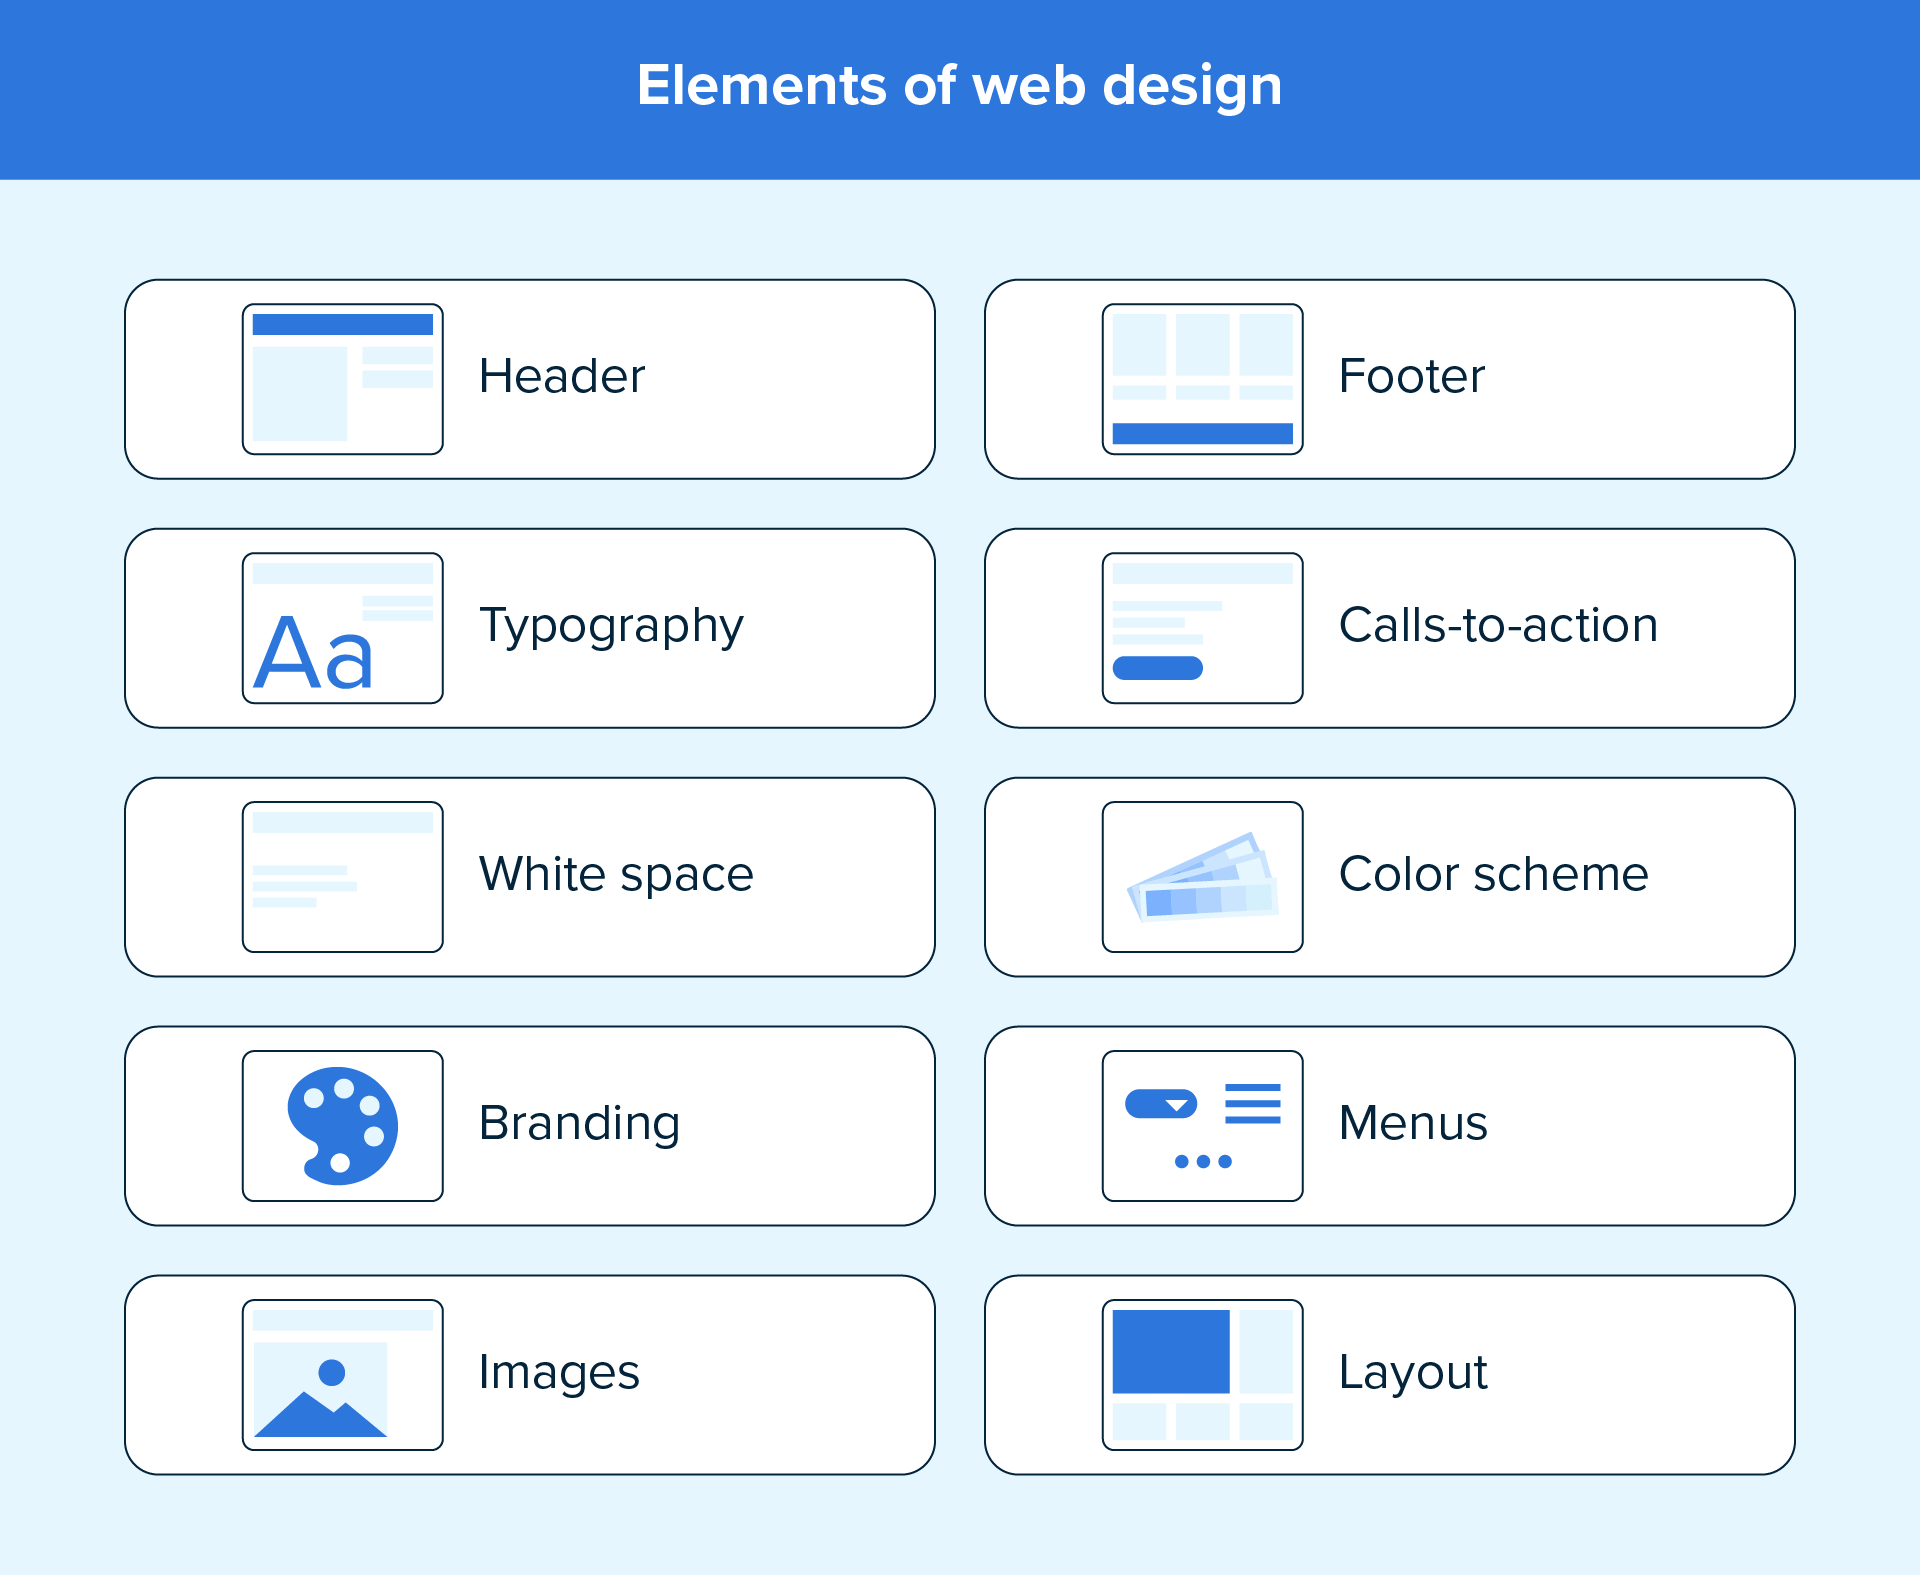 Most web design elements are something every webpage needs.